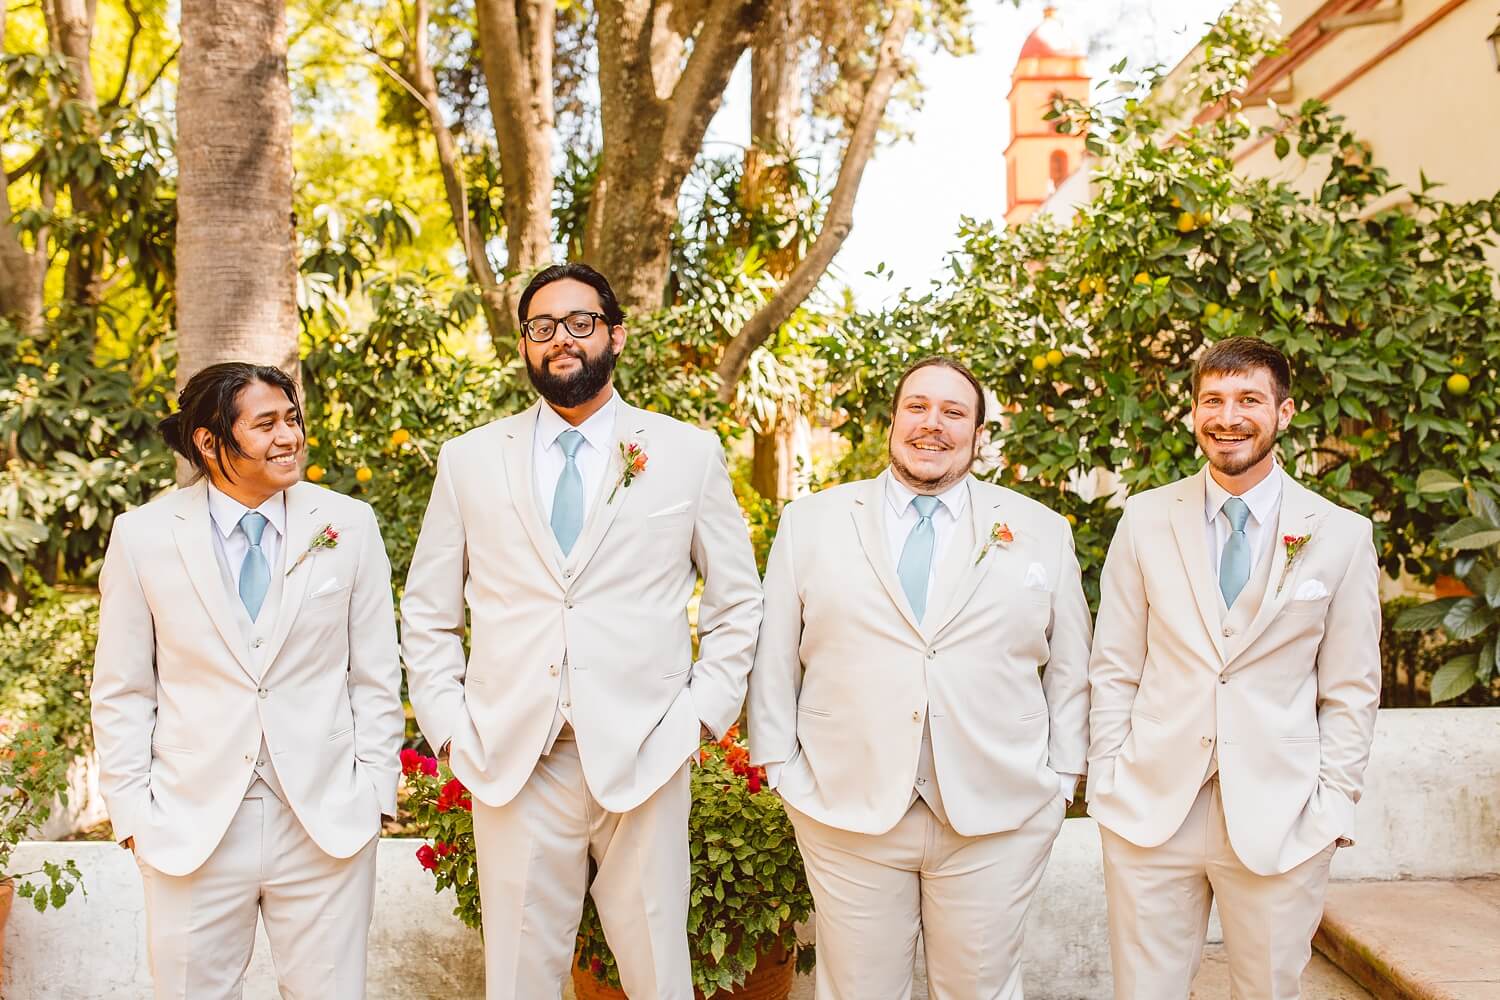 Groom with groomsmen in tan suits at Mexico destination wedding | Brooke Michelle Photo